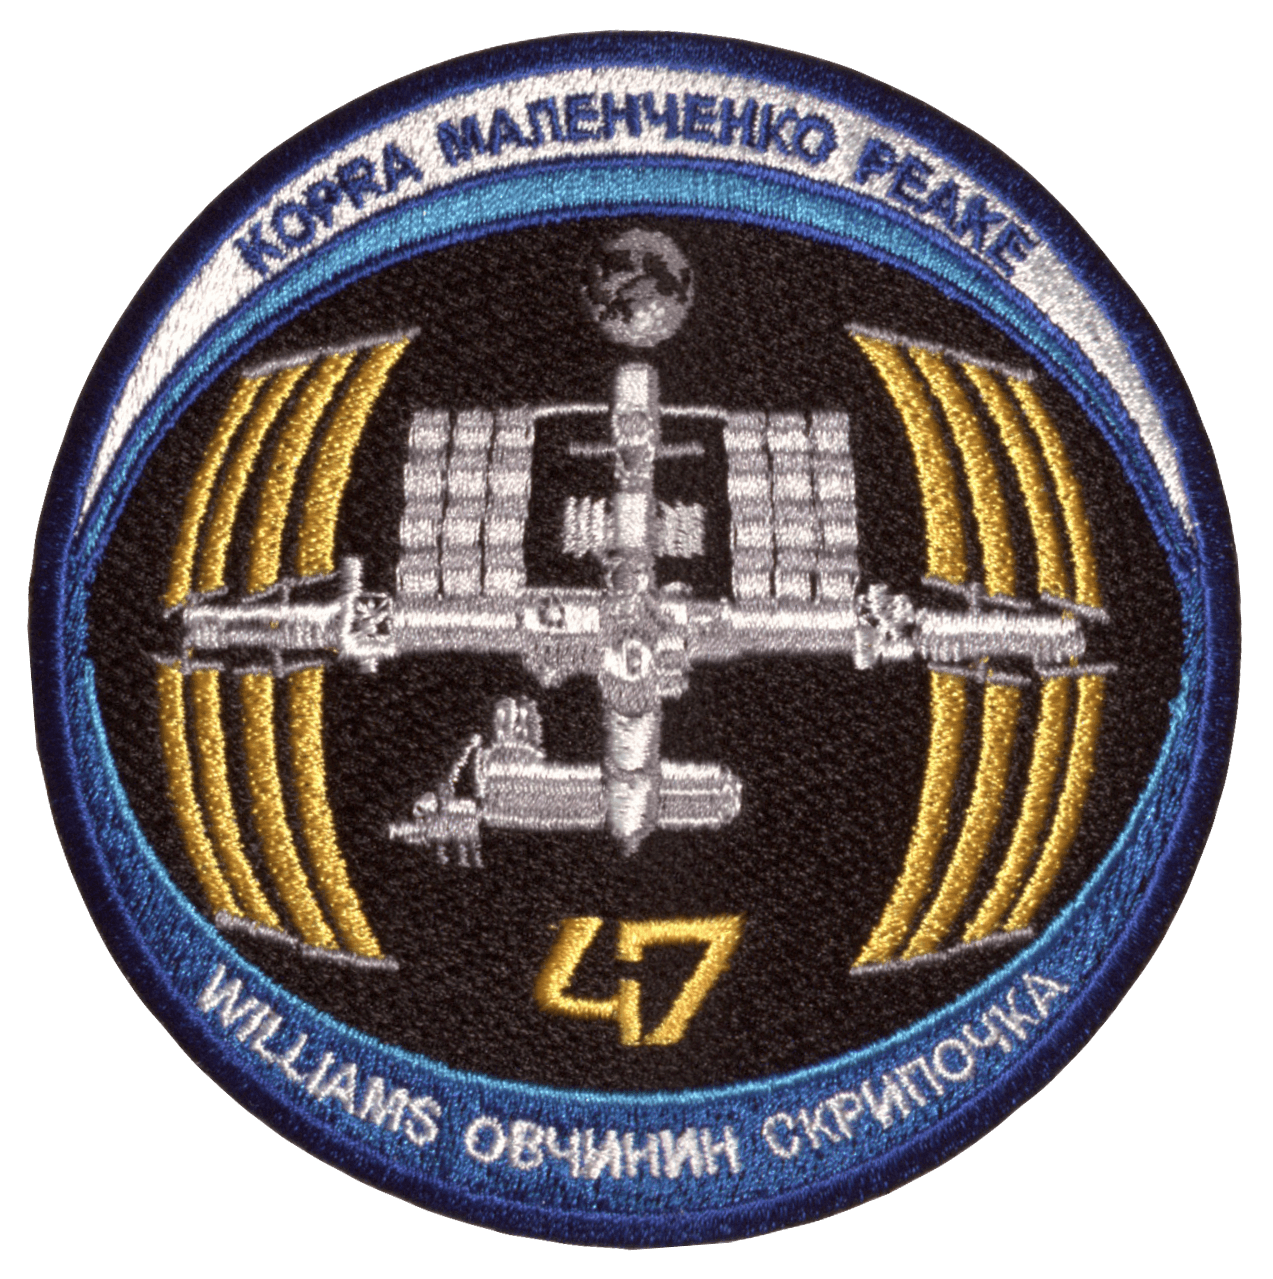 Expedition 47 - Space Patches